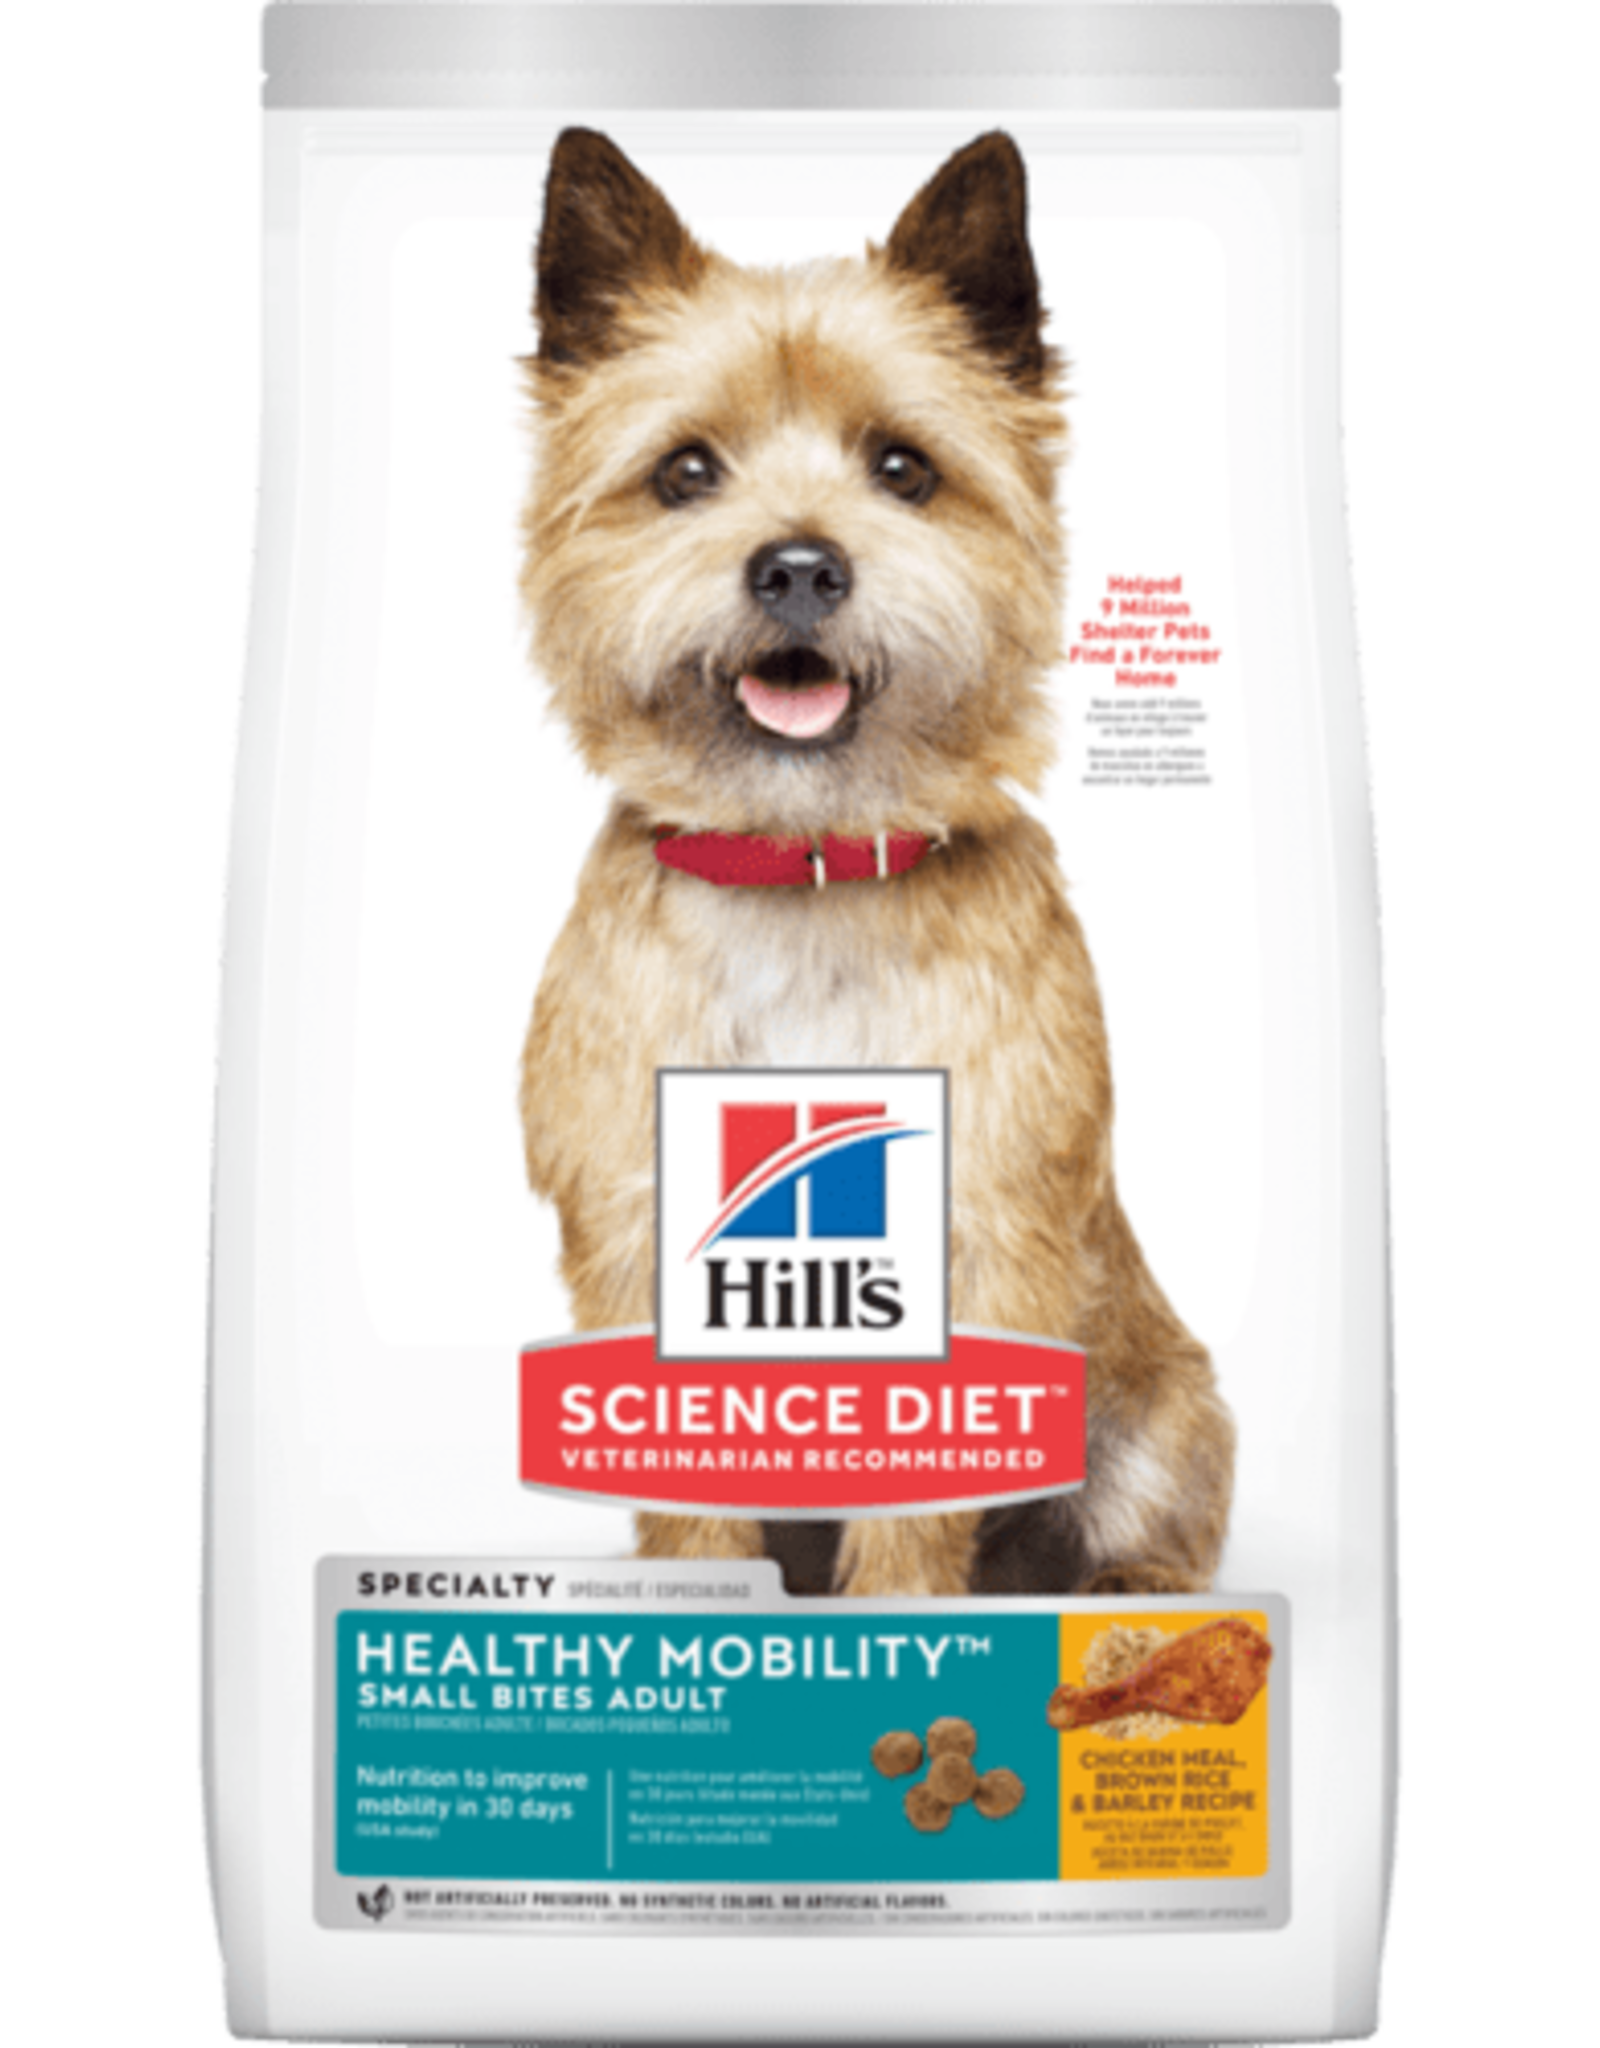 SCIENCE DIET HILL'S SCIENCE DIET CANINE ADULT HEALTHY MOBILITY SMALL BITES 4LBS